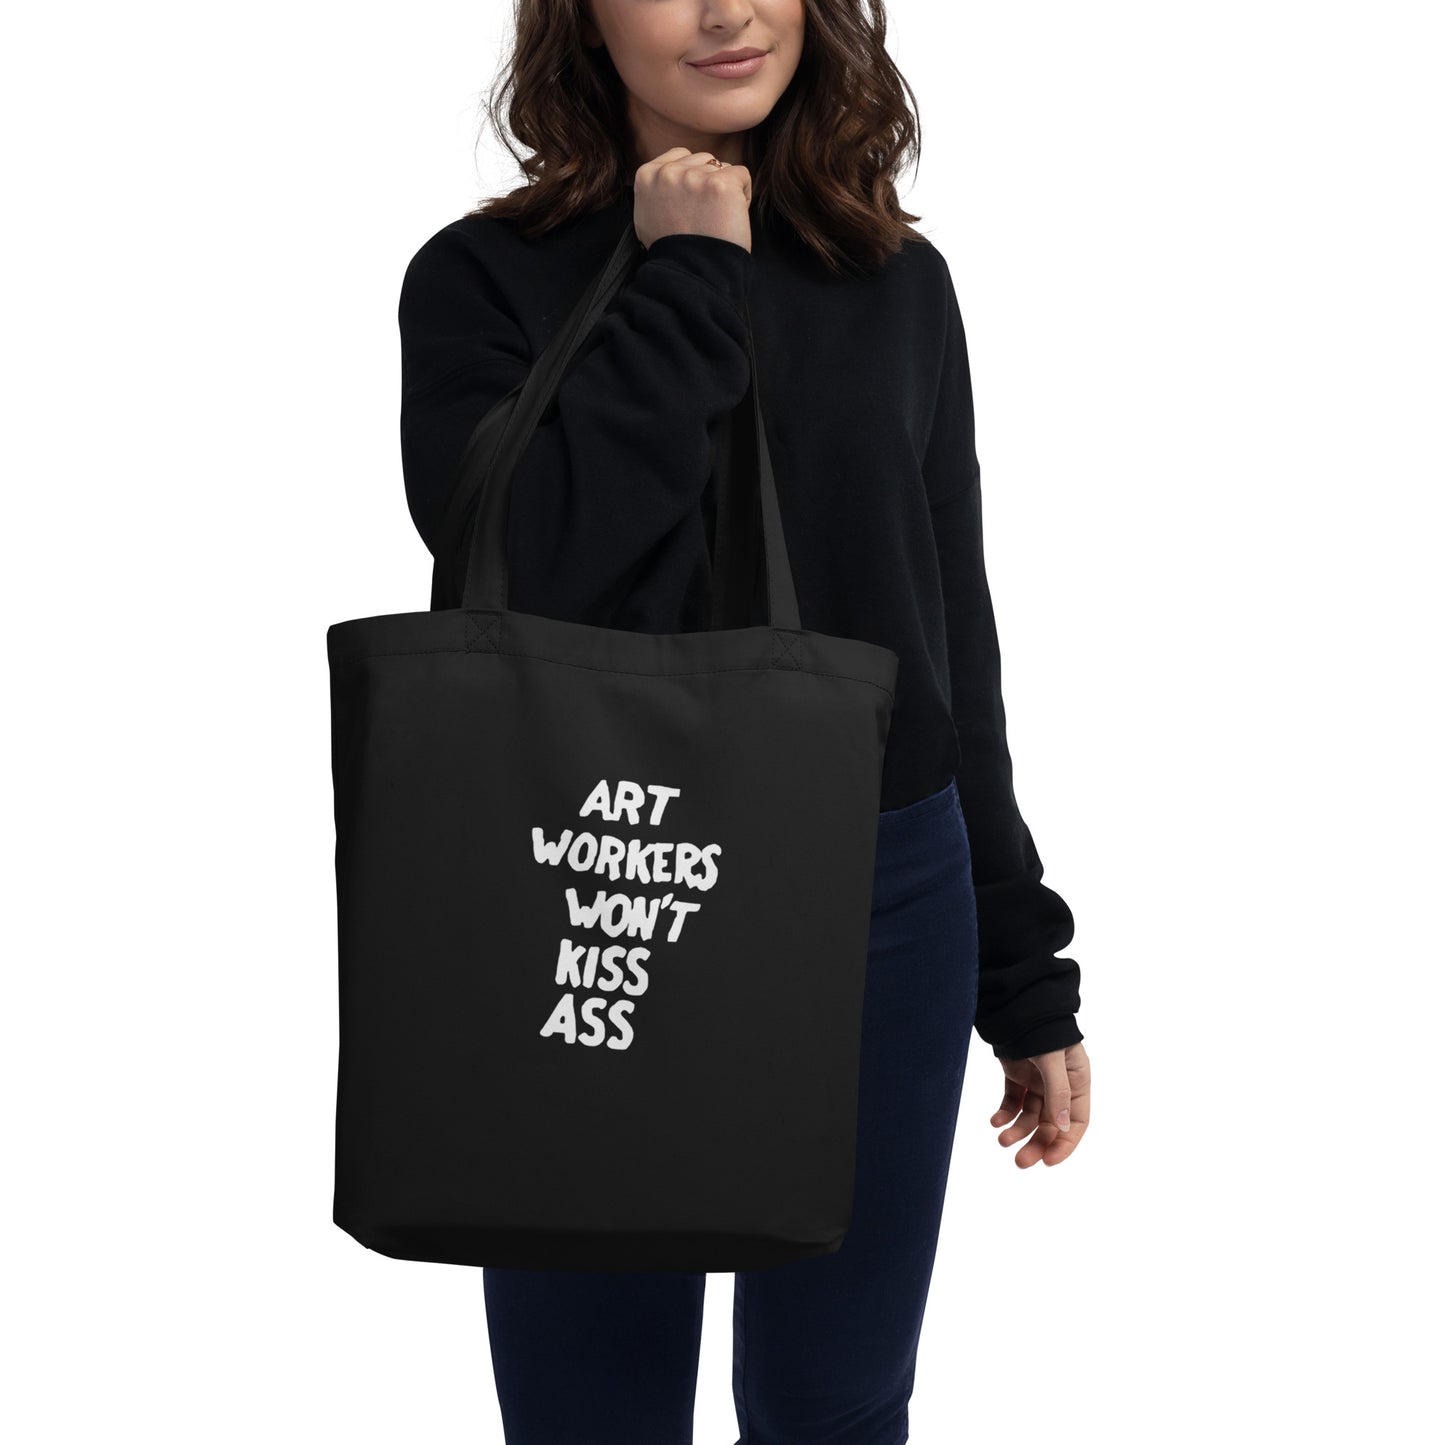 AWC Art Workers Won't Kiss Ass tote